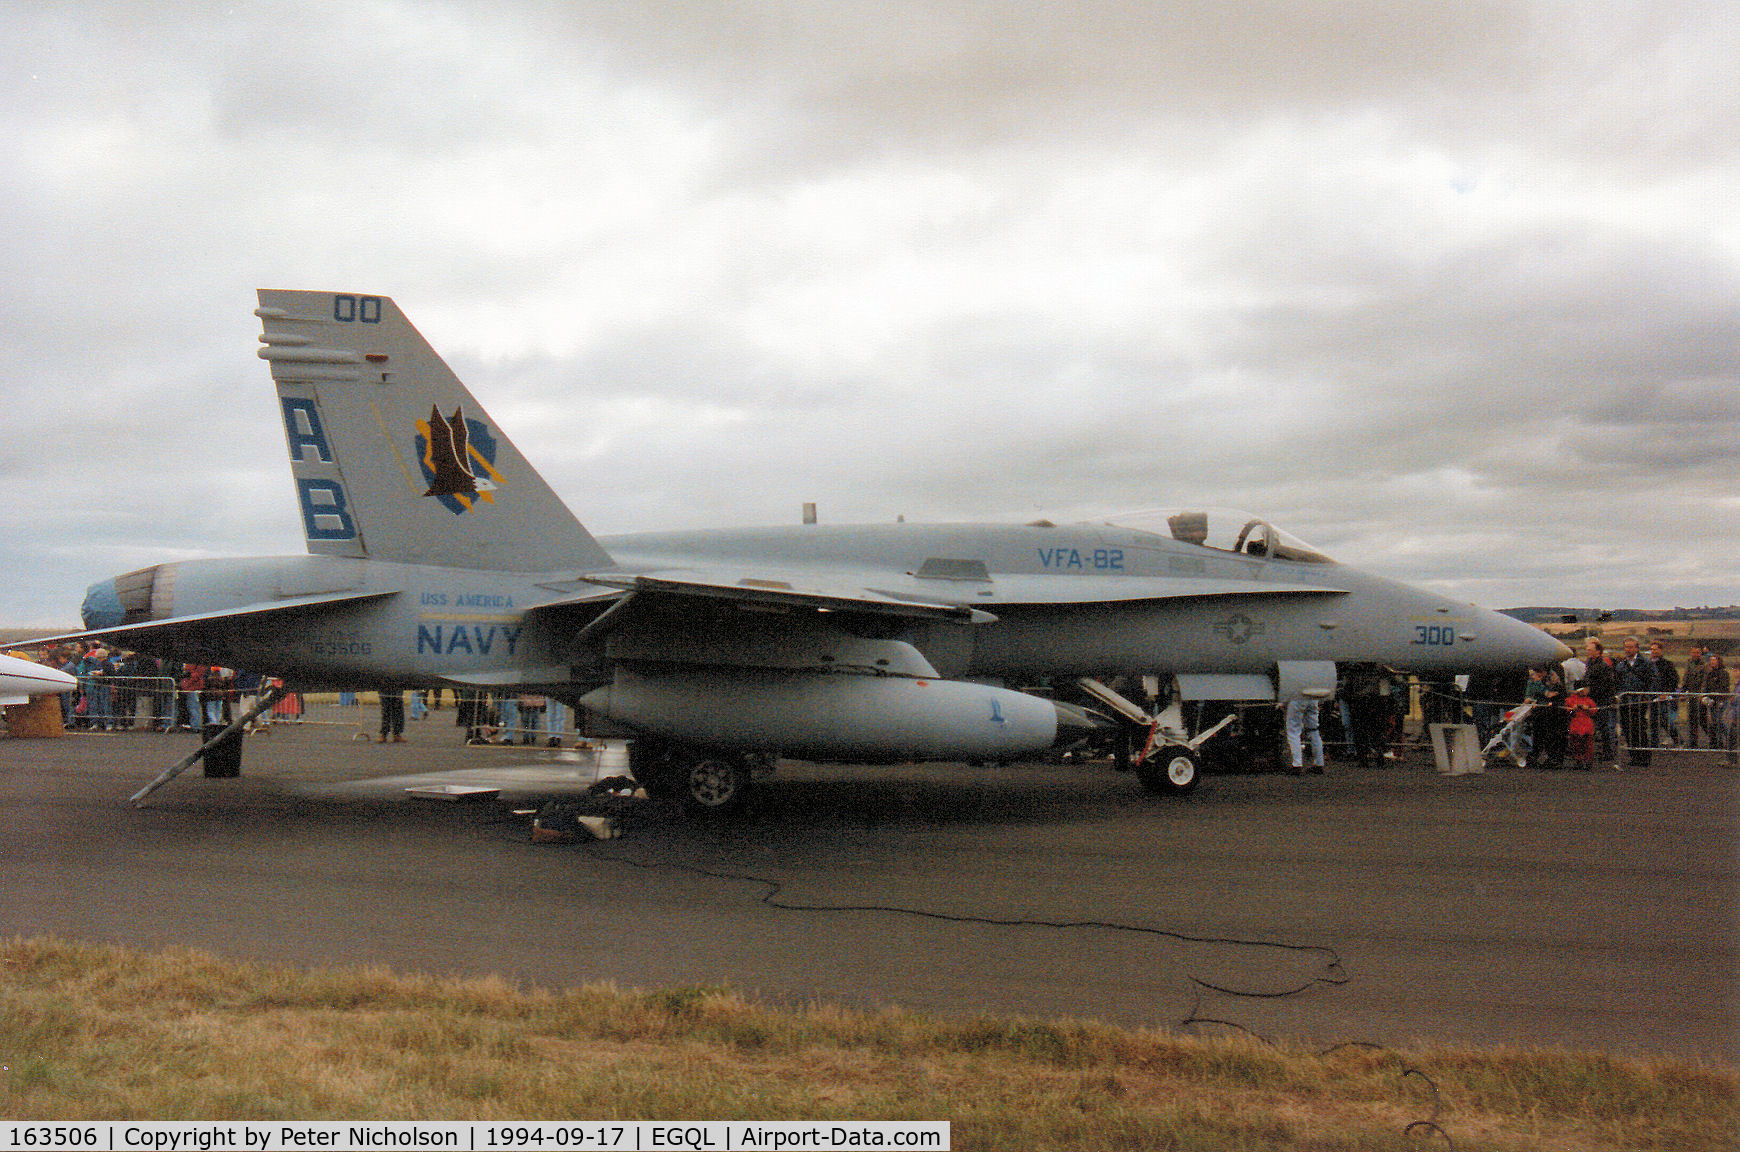 163506, 1988 McDonnell Douglas F/A-18C Hornet C/N 0752/C059, F/A-18C Hornet of Attack Squadron VFA-82 aboard USS America in CVW-1 CAG special markings on display at the 1994 RAF Leuchars Airshow.